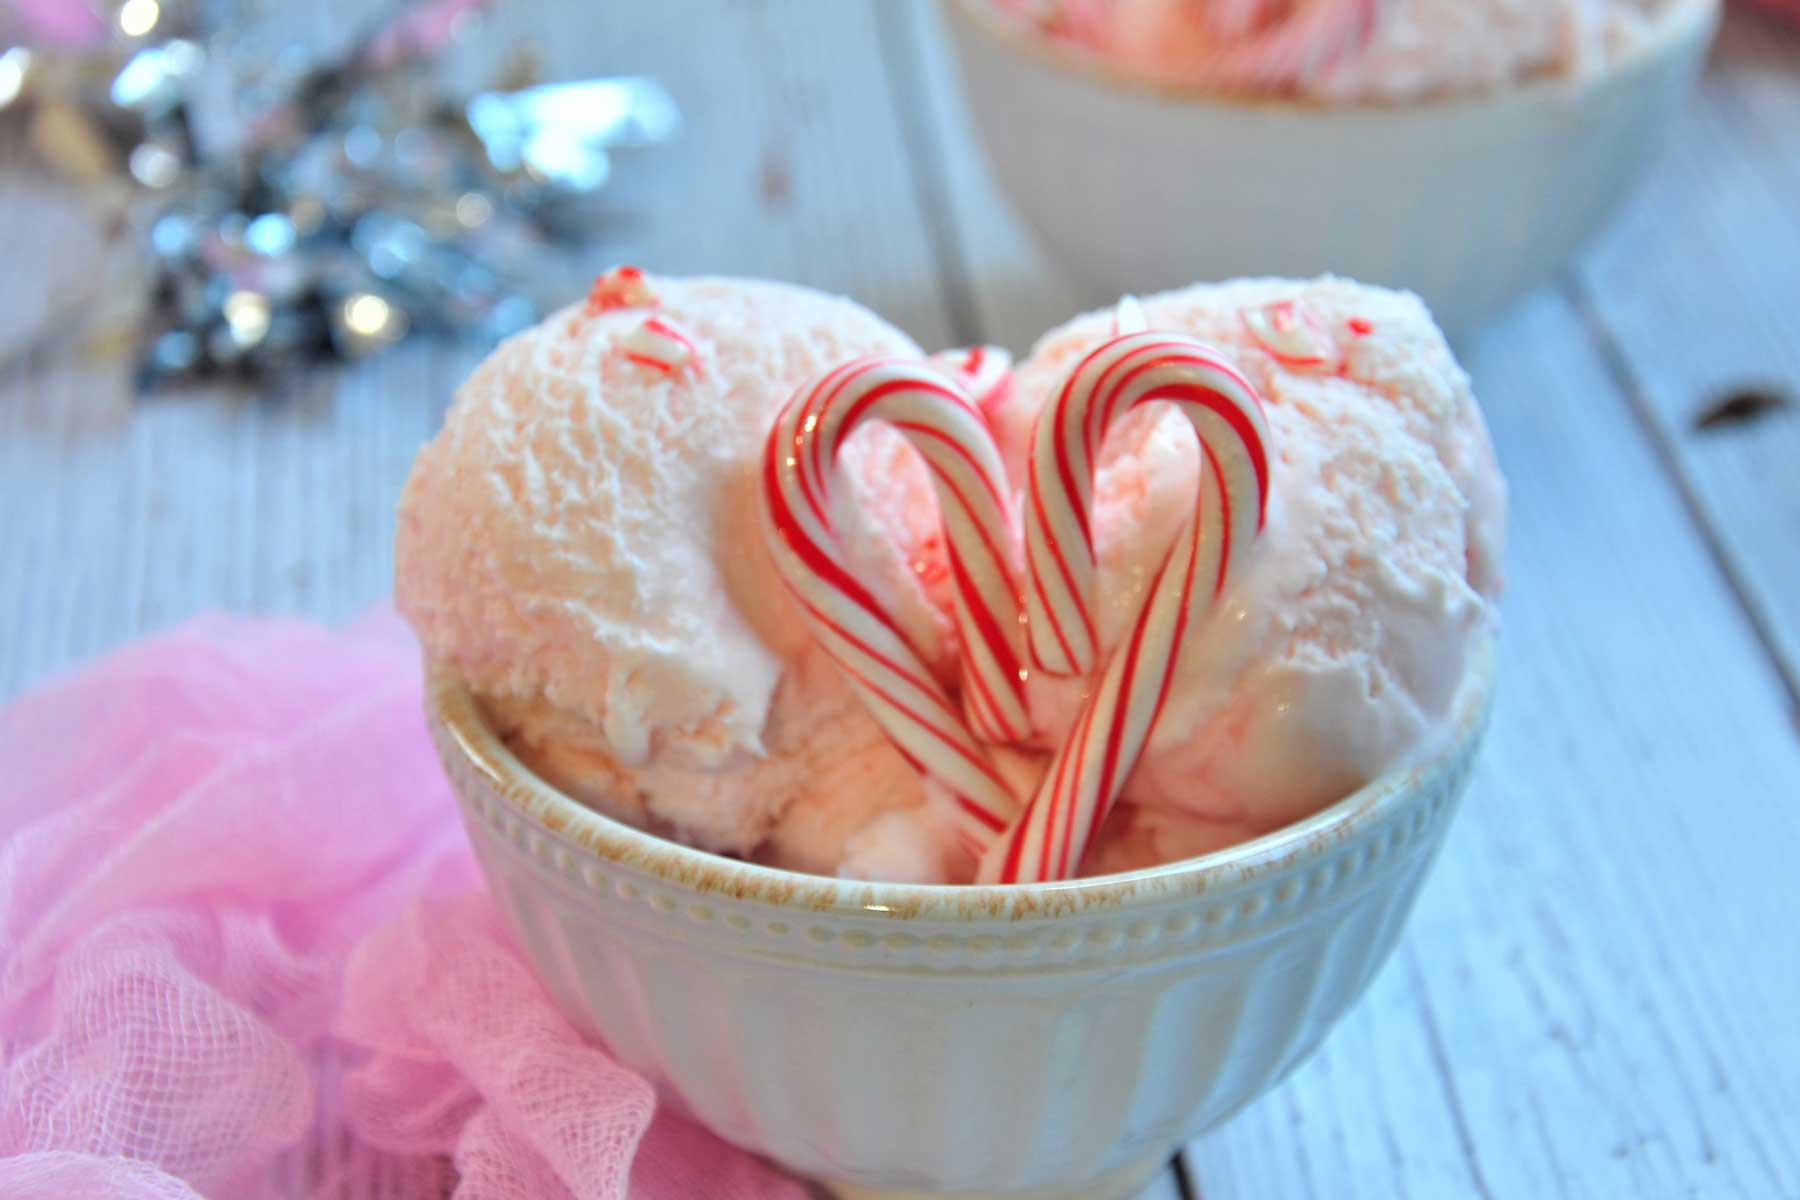 Peppermint ice cream scoops in a bowl.